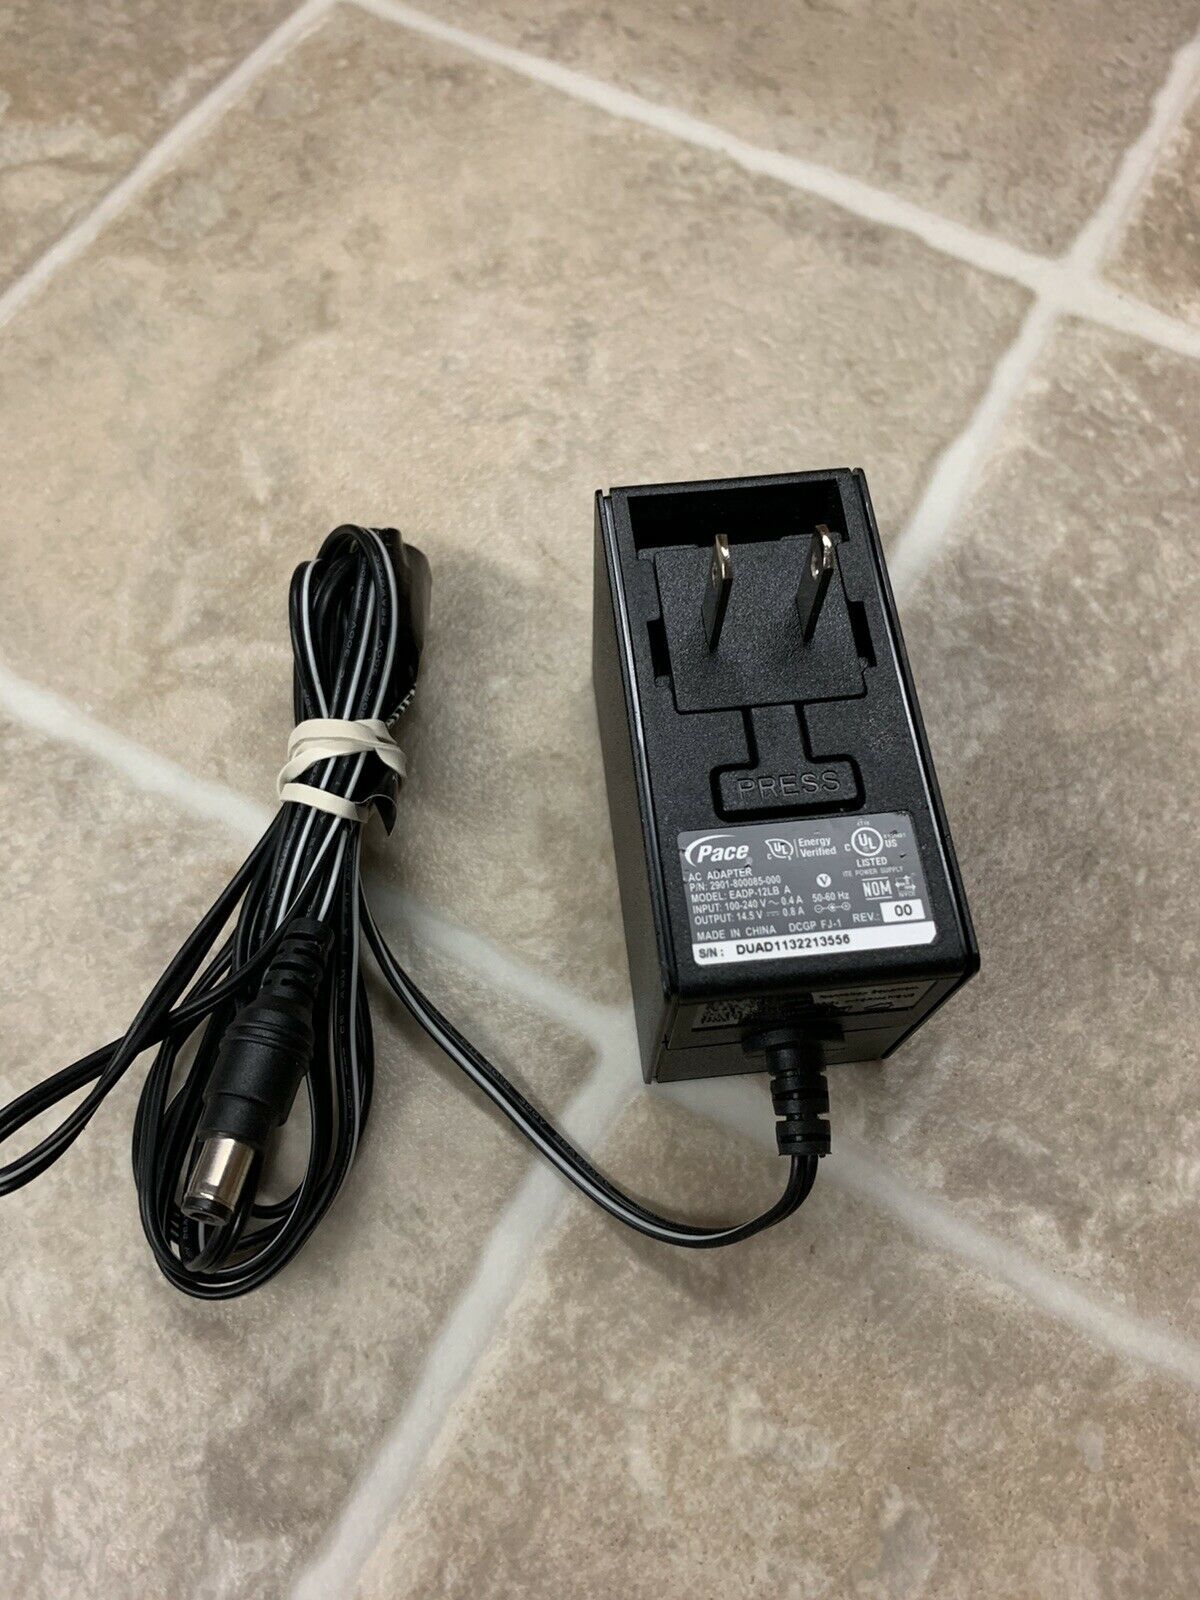 *Brand NEW*EADP-12LB A 2901-800085-000 Pace 14.5V 0.8A AC DC Adapter POWER SUPPLY